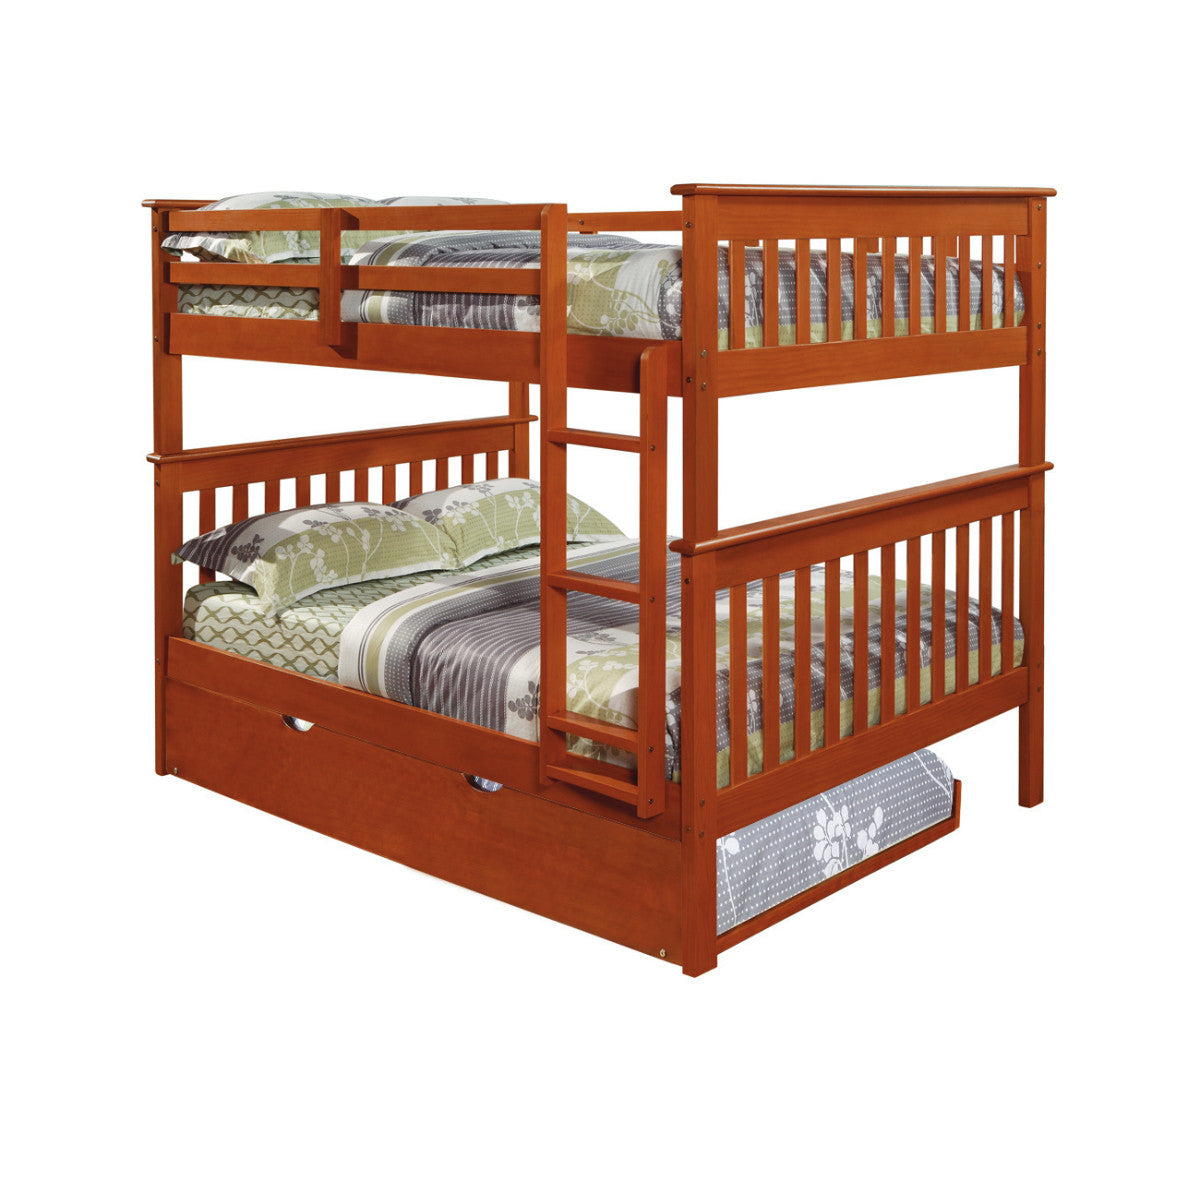 FULL/FULL MISSION BUNK BED WITH TRUNDLE BED LIGHT ESPRESSO FINISH